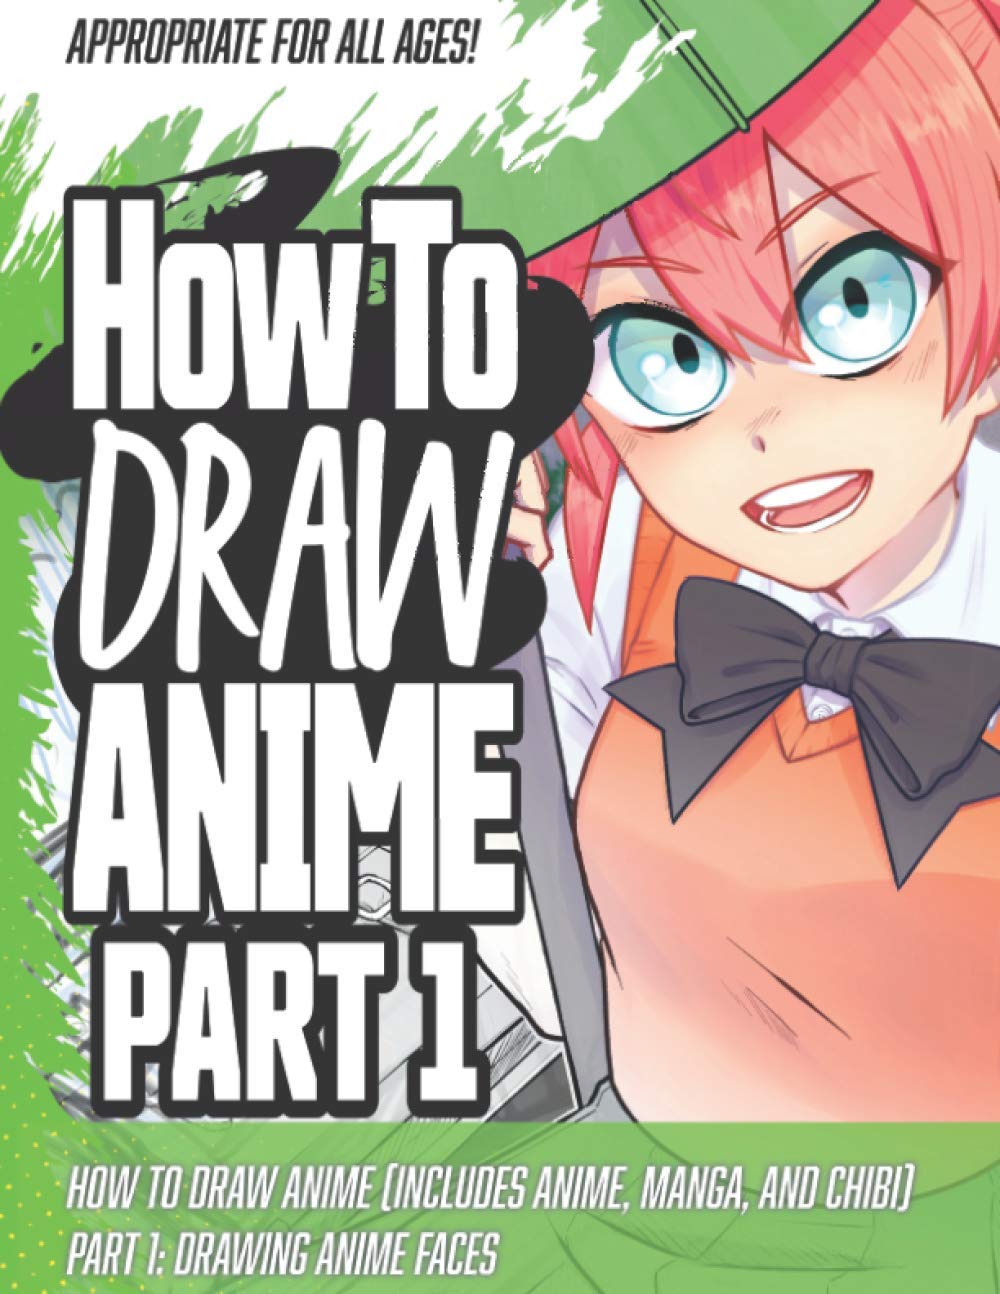 How to Draw Anime (Includes Anime, Manga and Chibi) Part 1 Drawing